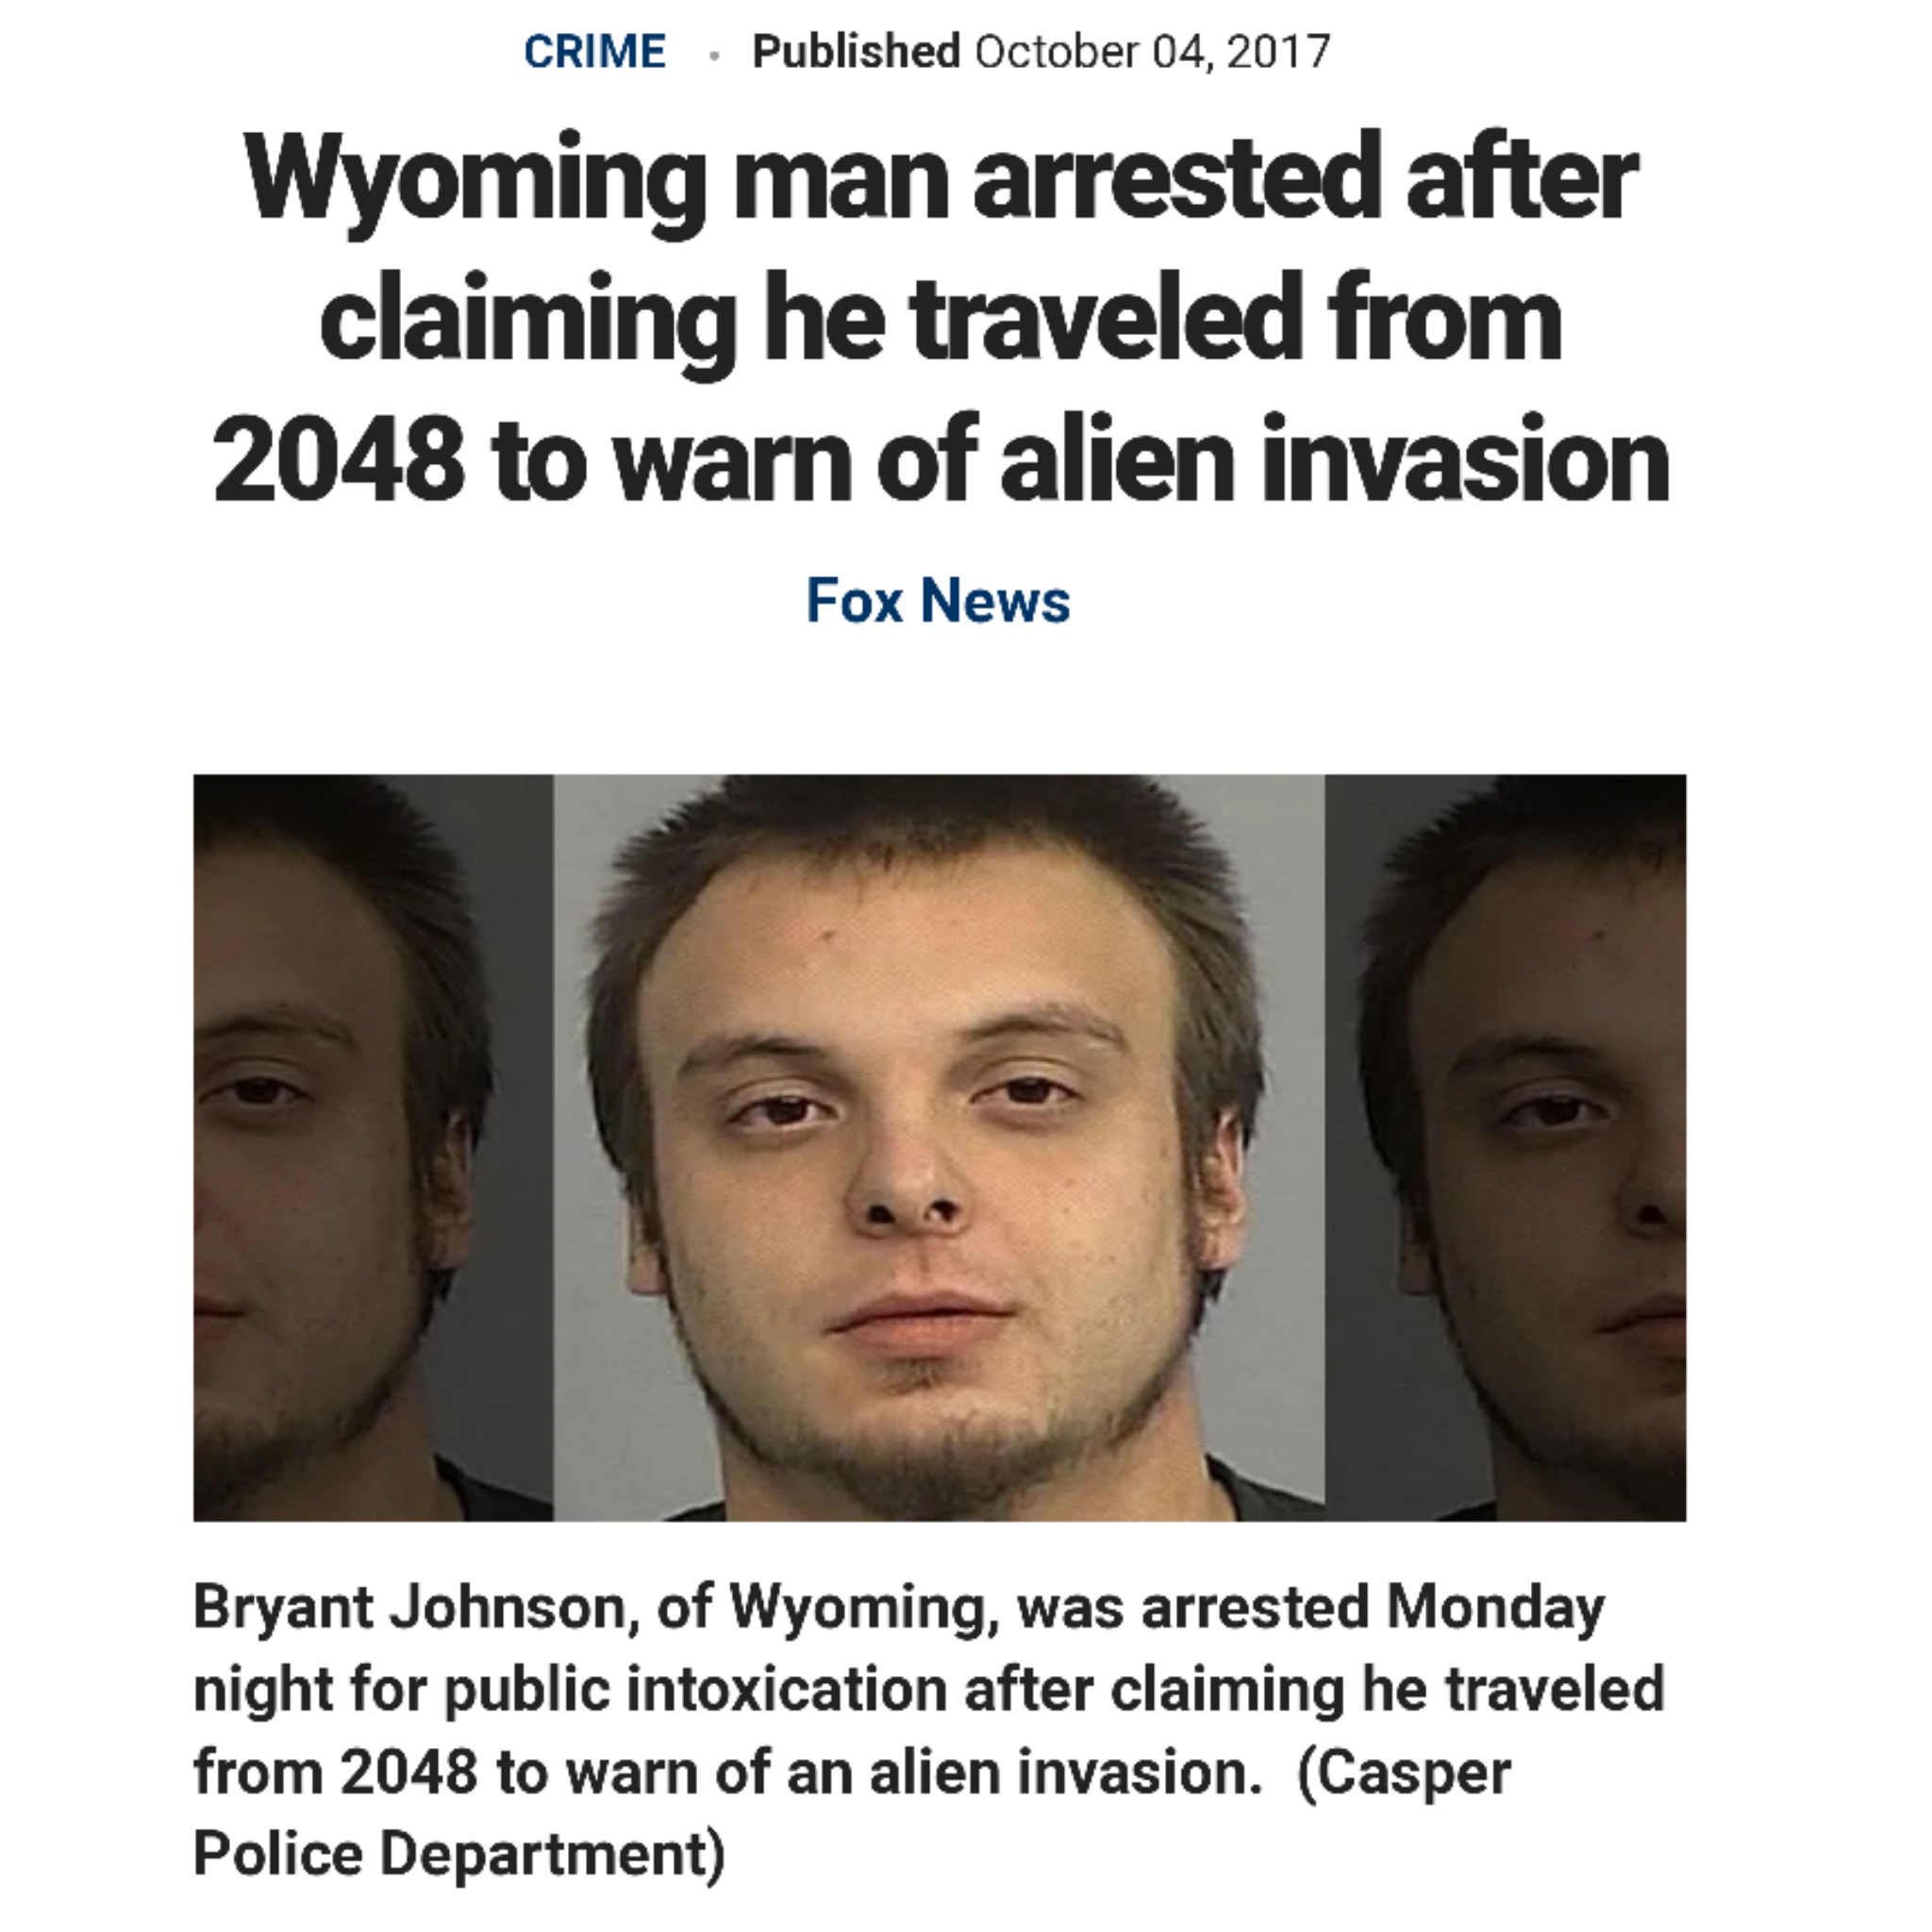 dumb florida arrests - Crime . Published Wyoming man arrested after claiming he traveled from 2048 to warn of alien invasion Bryant Johnson, of Wyoming, was arrested Monday Police Department